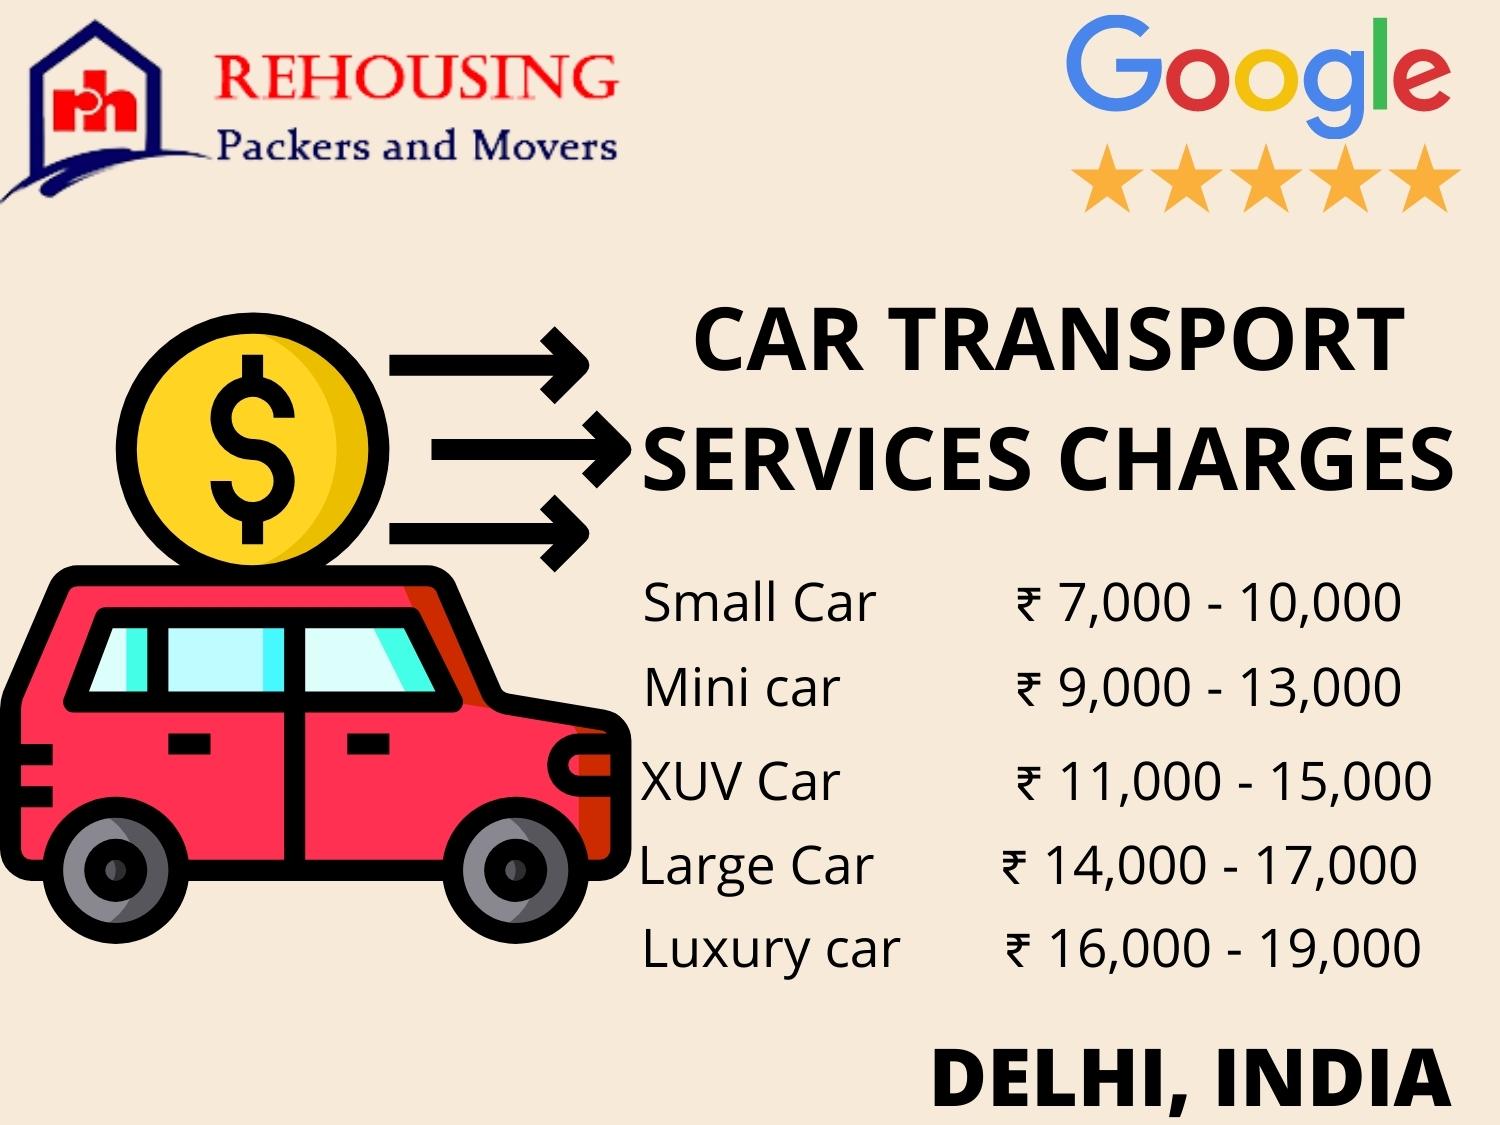 Our Car courier service in Delhi is registered and approved. Car carriers in Delhi tend